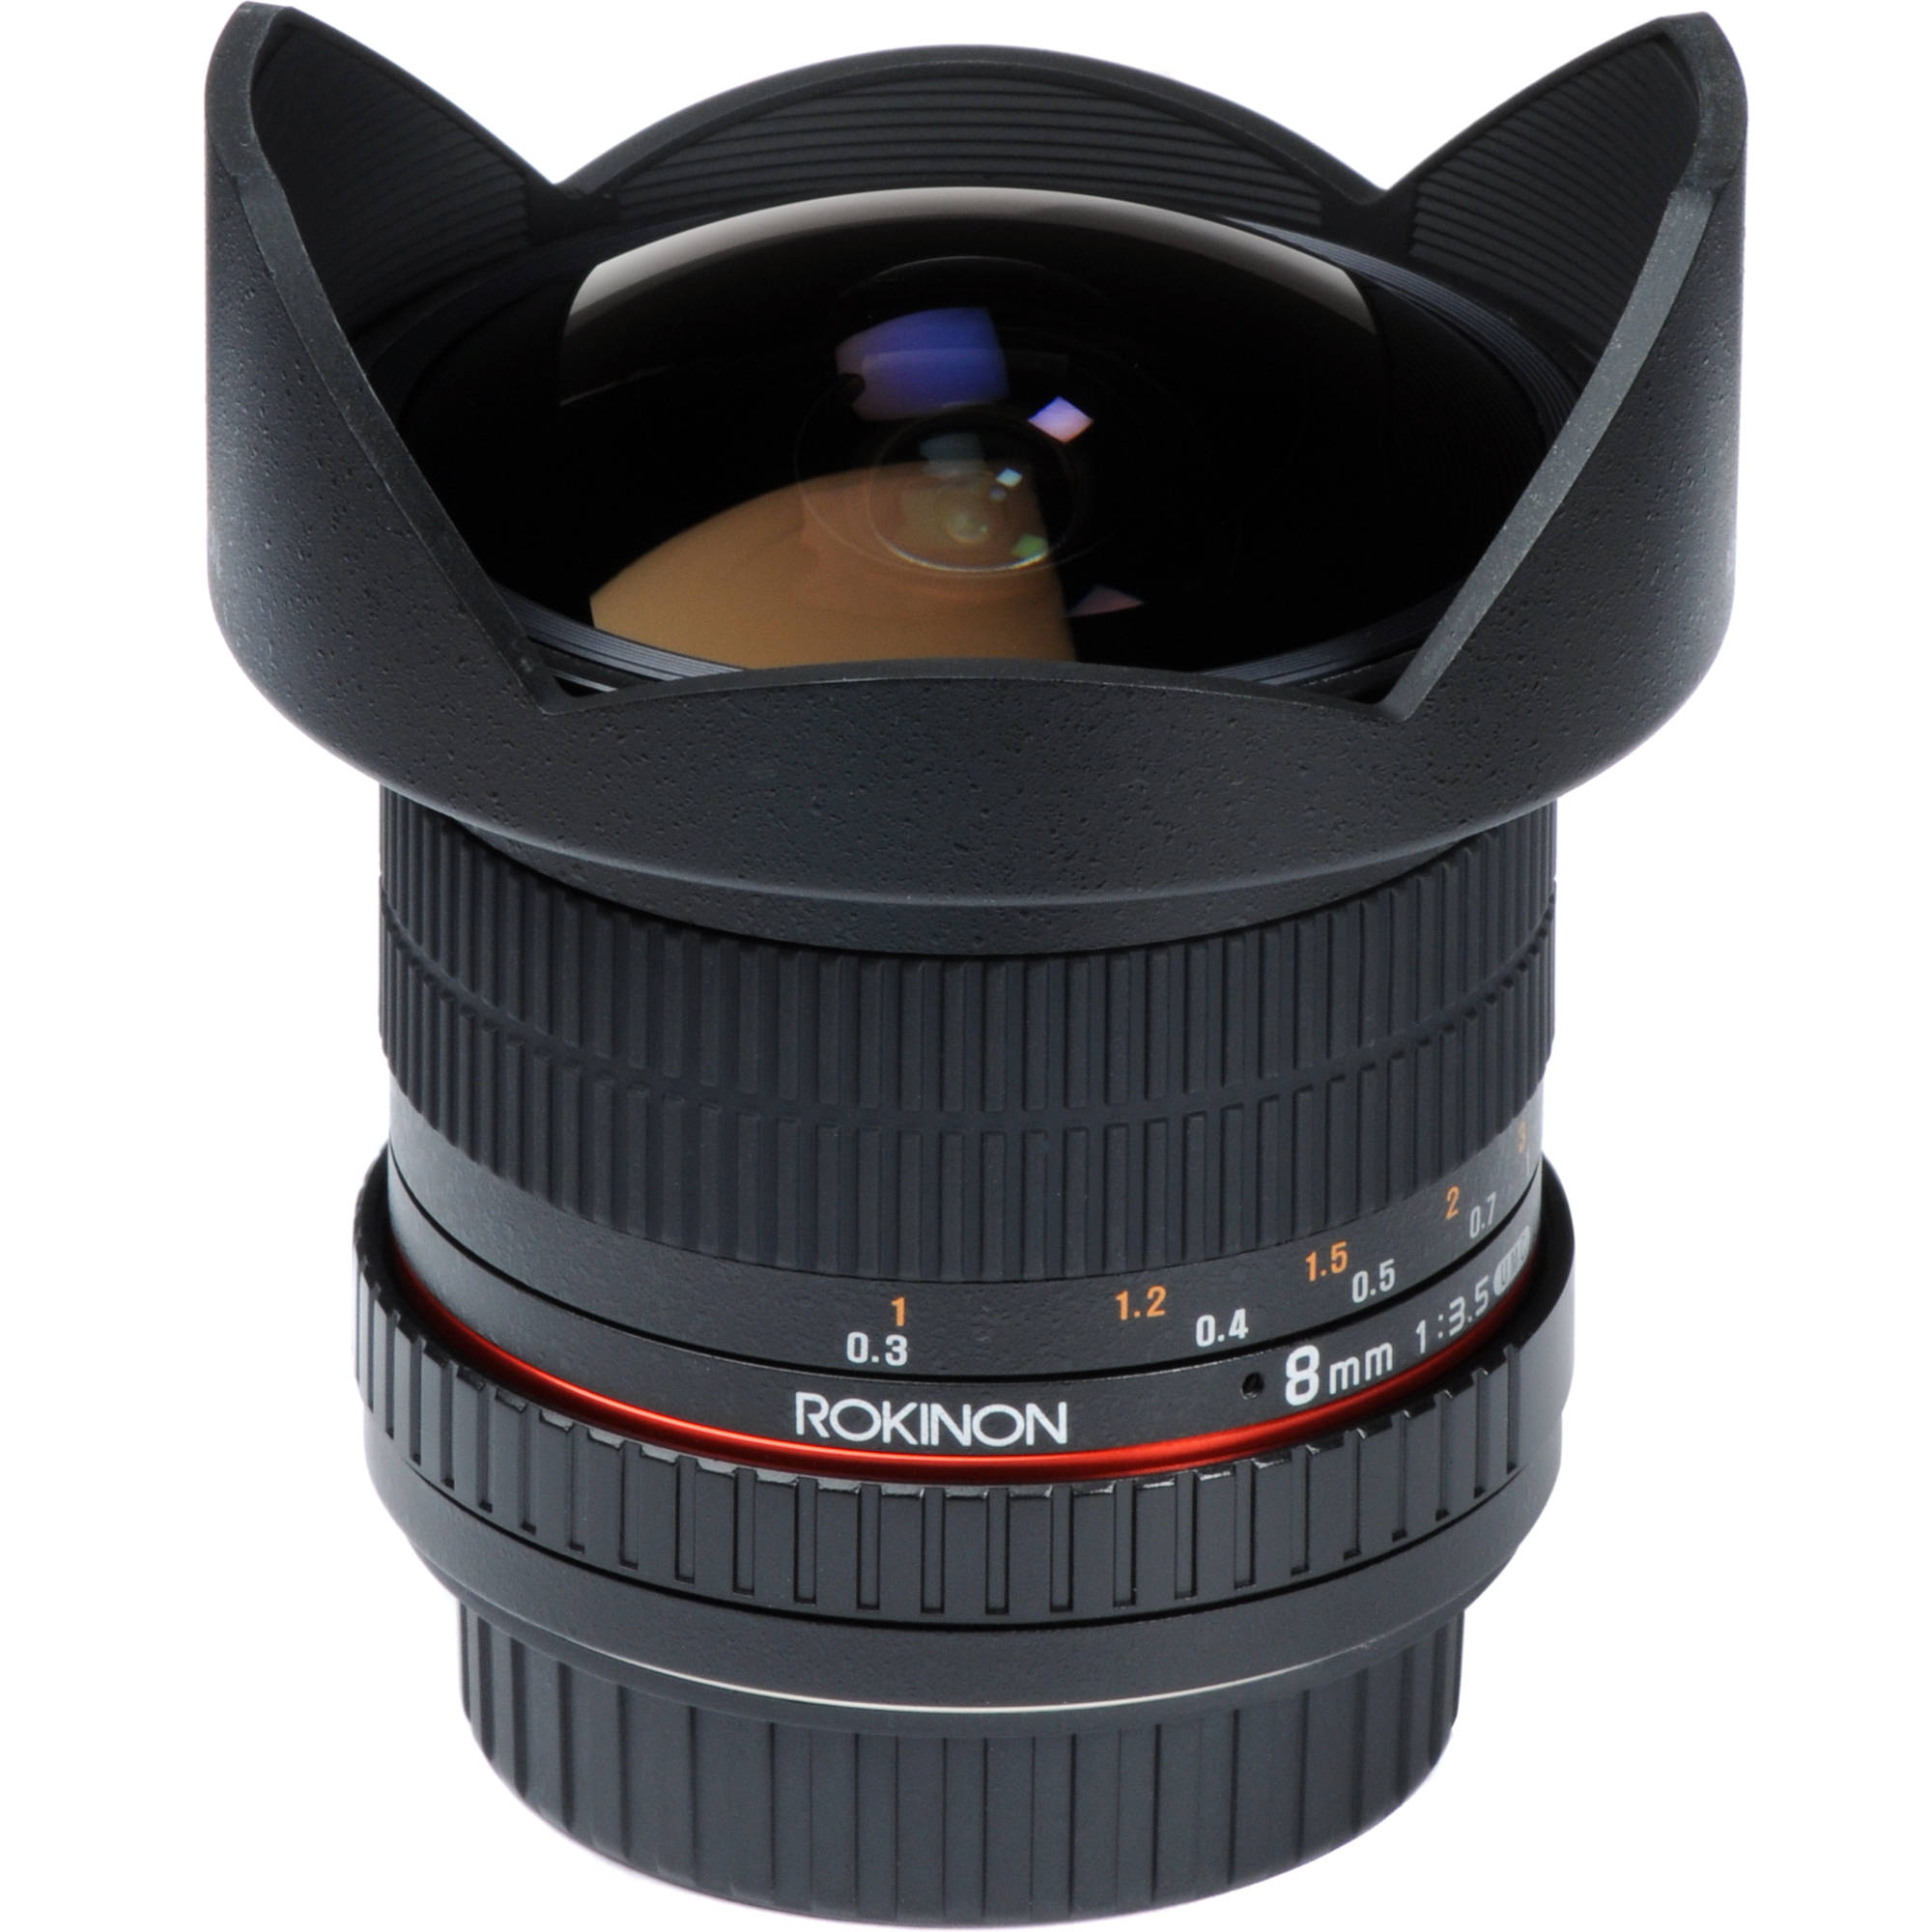 Rokinon HD8M-N 8mm f/3.5 HD Fisheye Lens with Auto Aperture Chip and